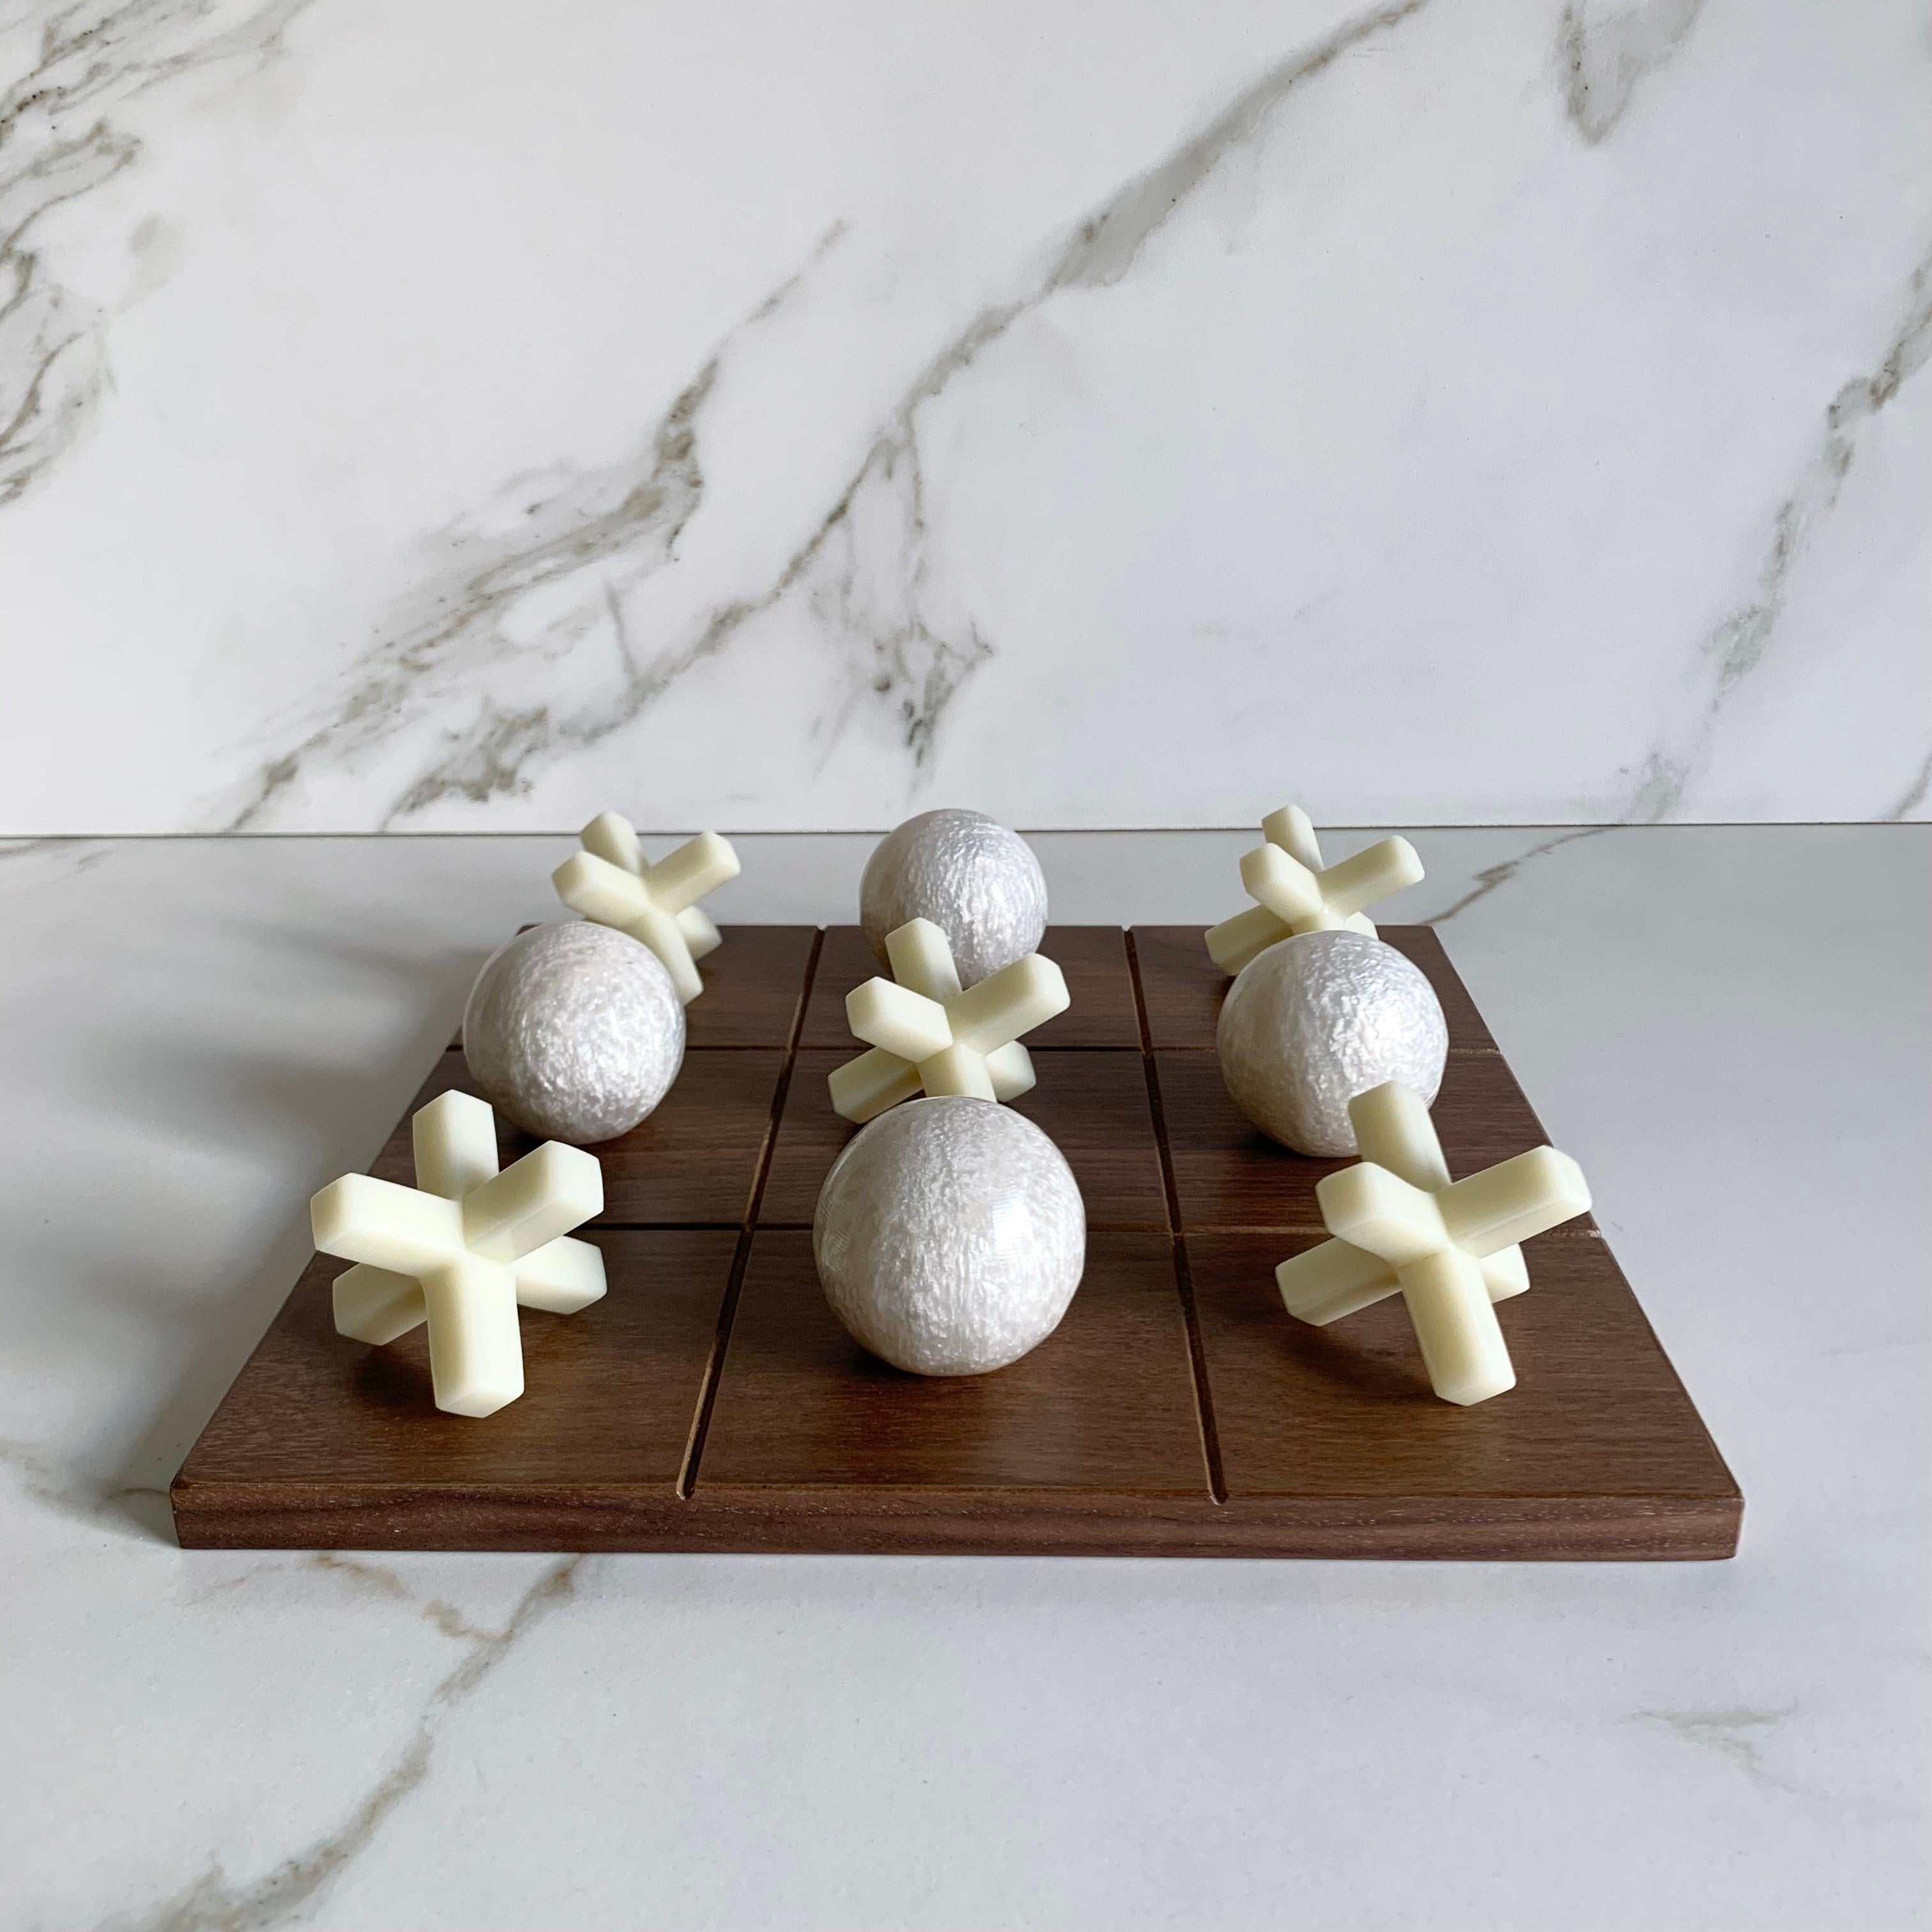 Our Tic Tac Toe is a beautiful, modern and fun take on the classic game. The three dimensional pieces are handmade in white pearl & ivory and the board is made of oak wood veneer. It will be the coolest statement piece on any coffee